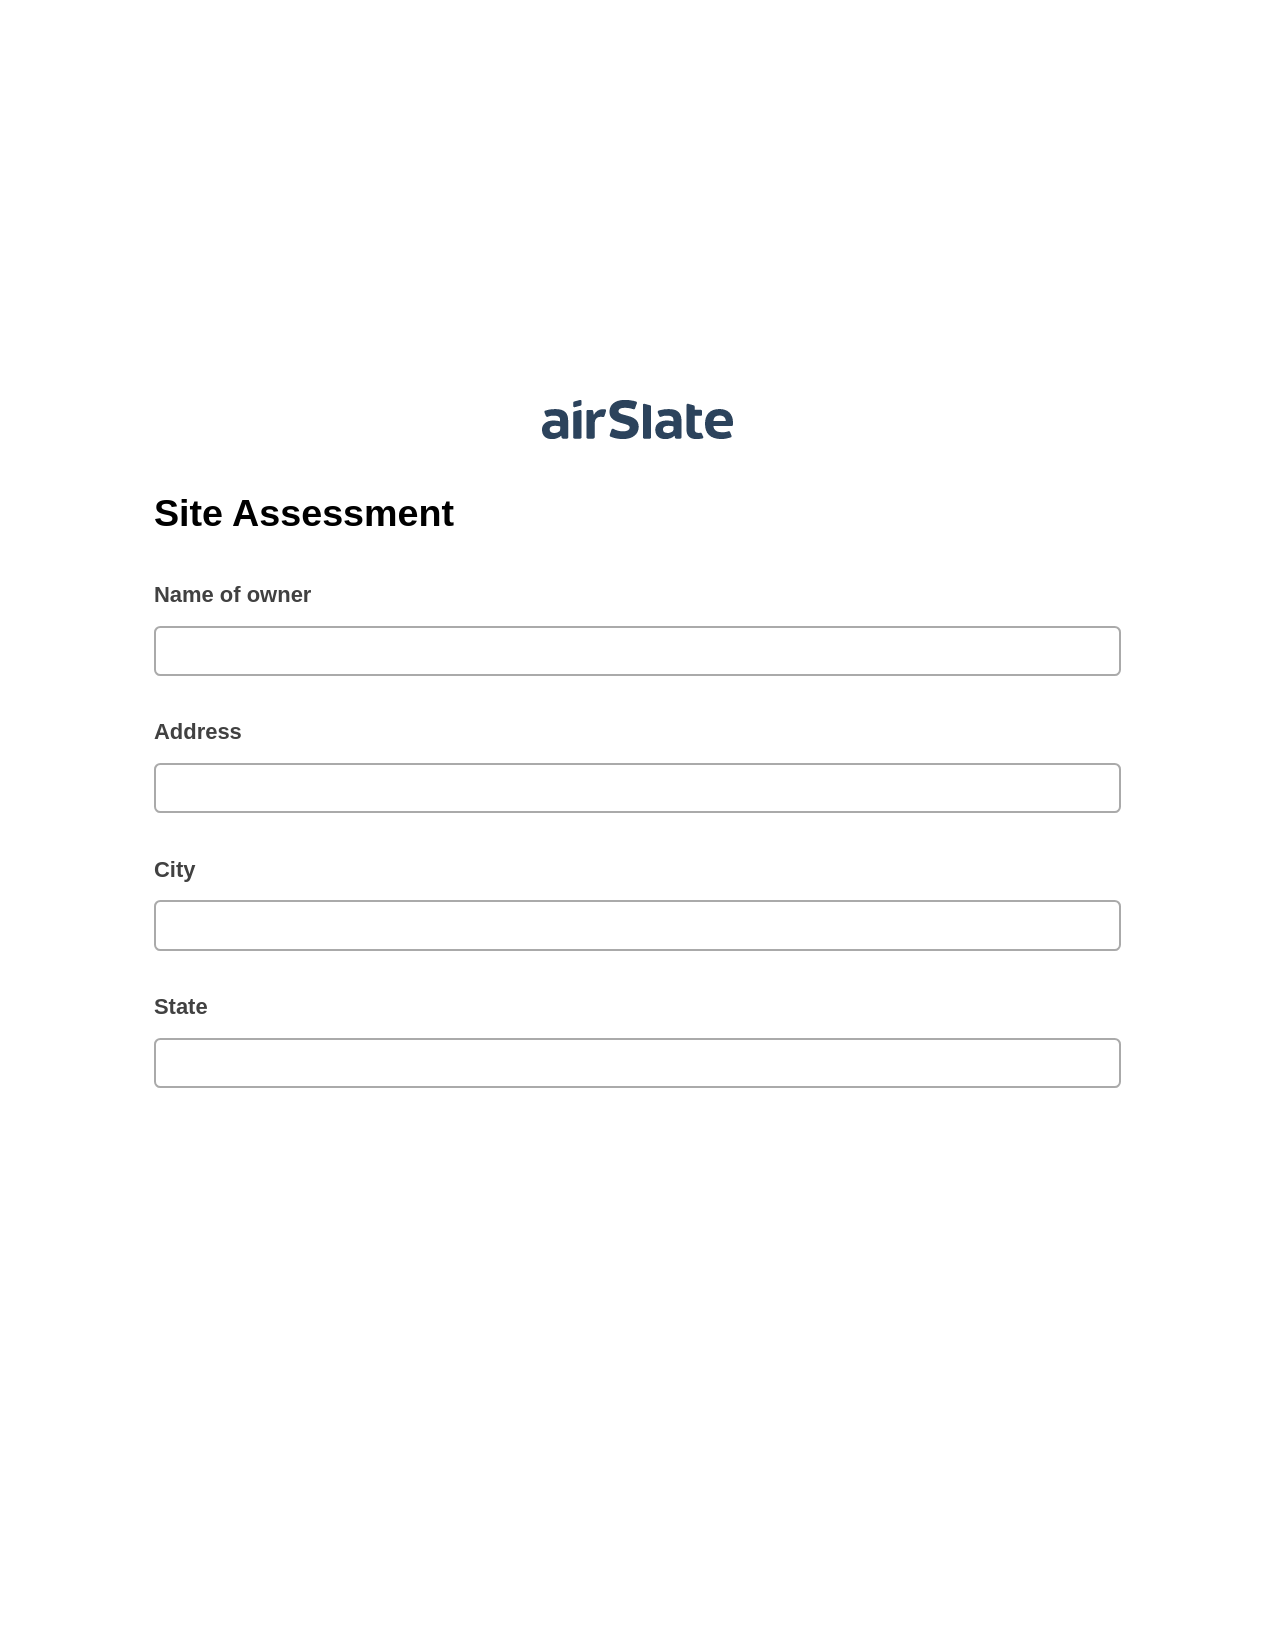 Site Assessment Pre-fill from NetSuite Records Bot, Reminder Bot, Box Bot